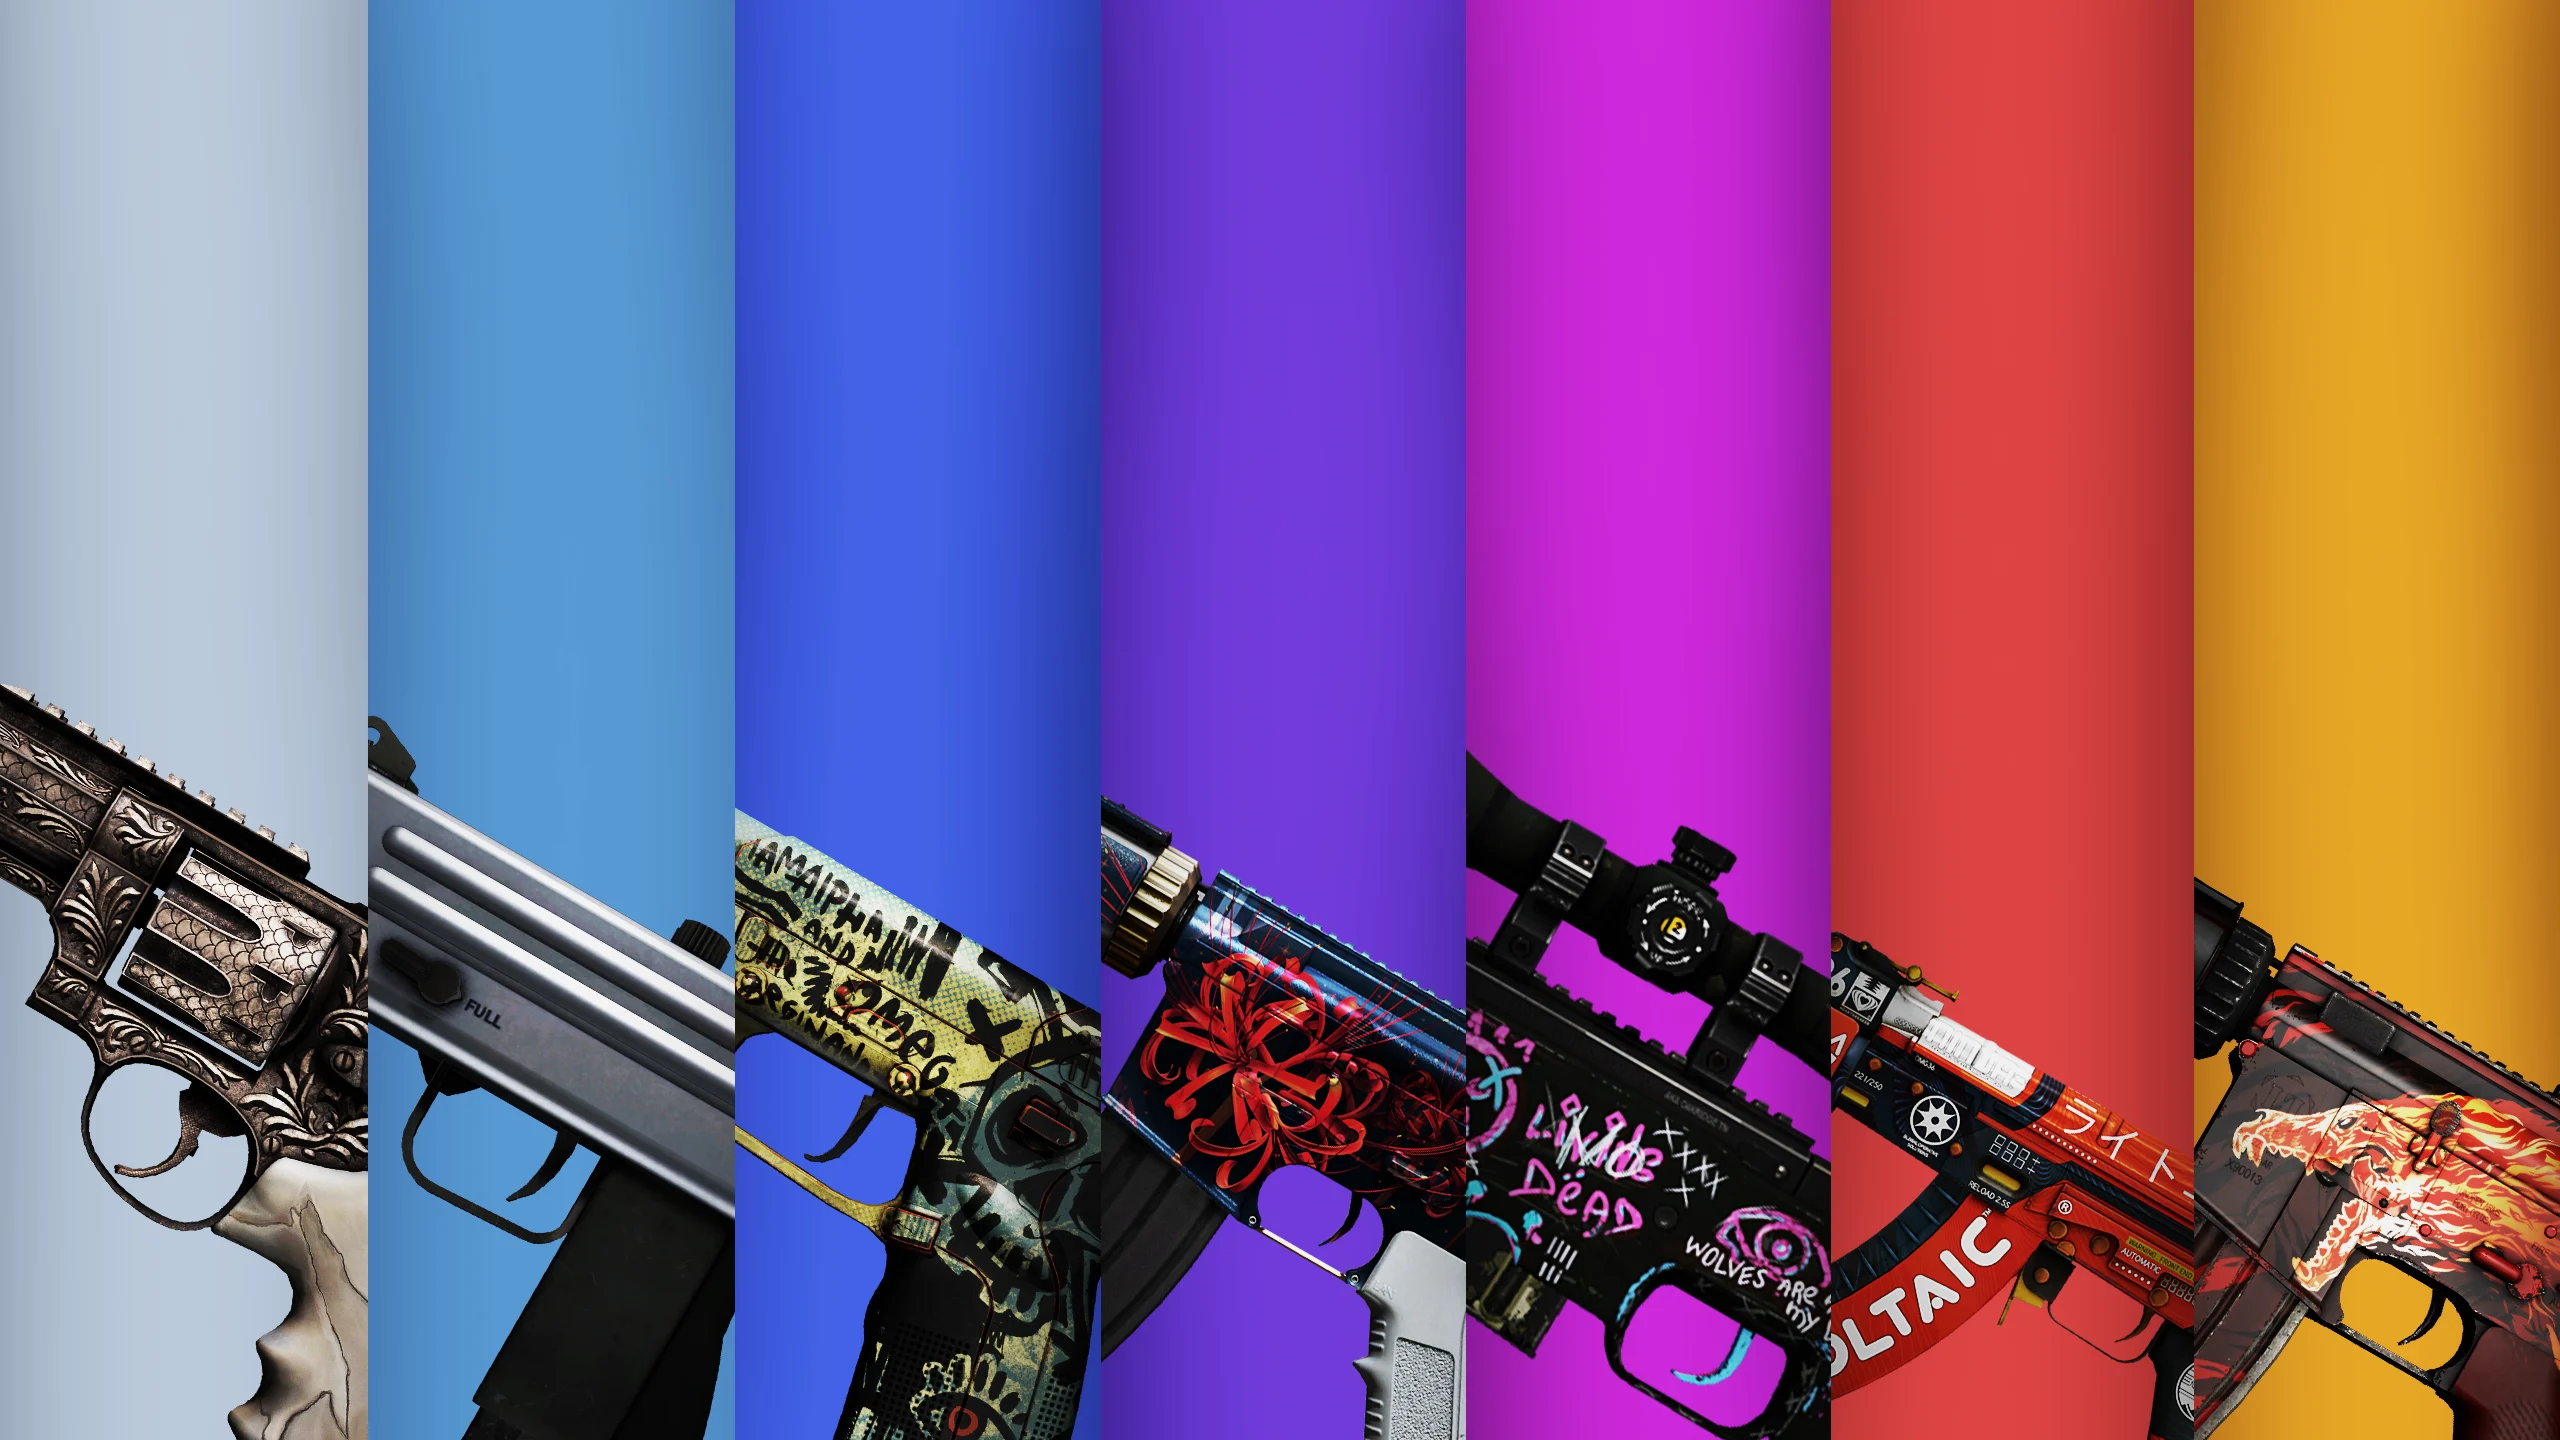 Rarity and Exclusivity of CS:GO Skins explained